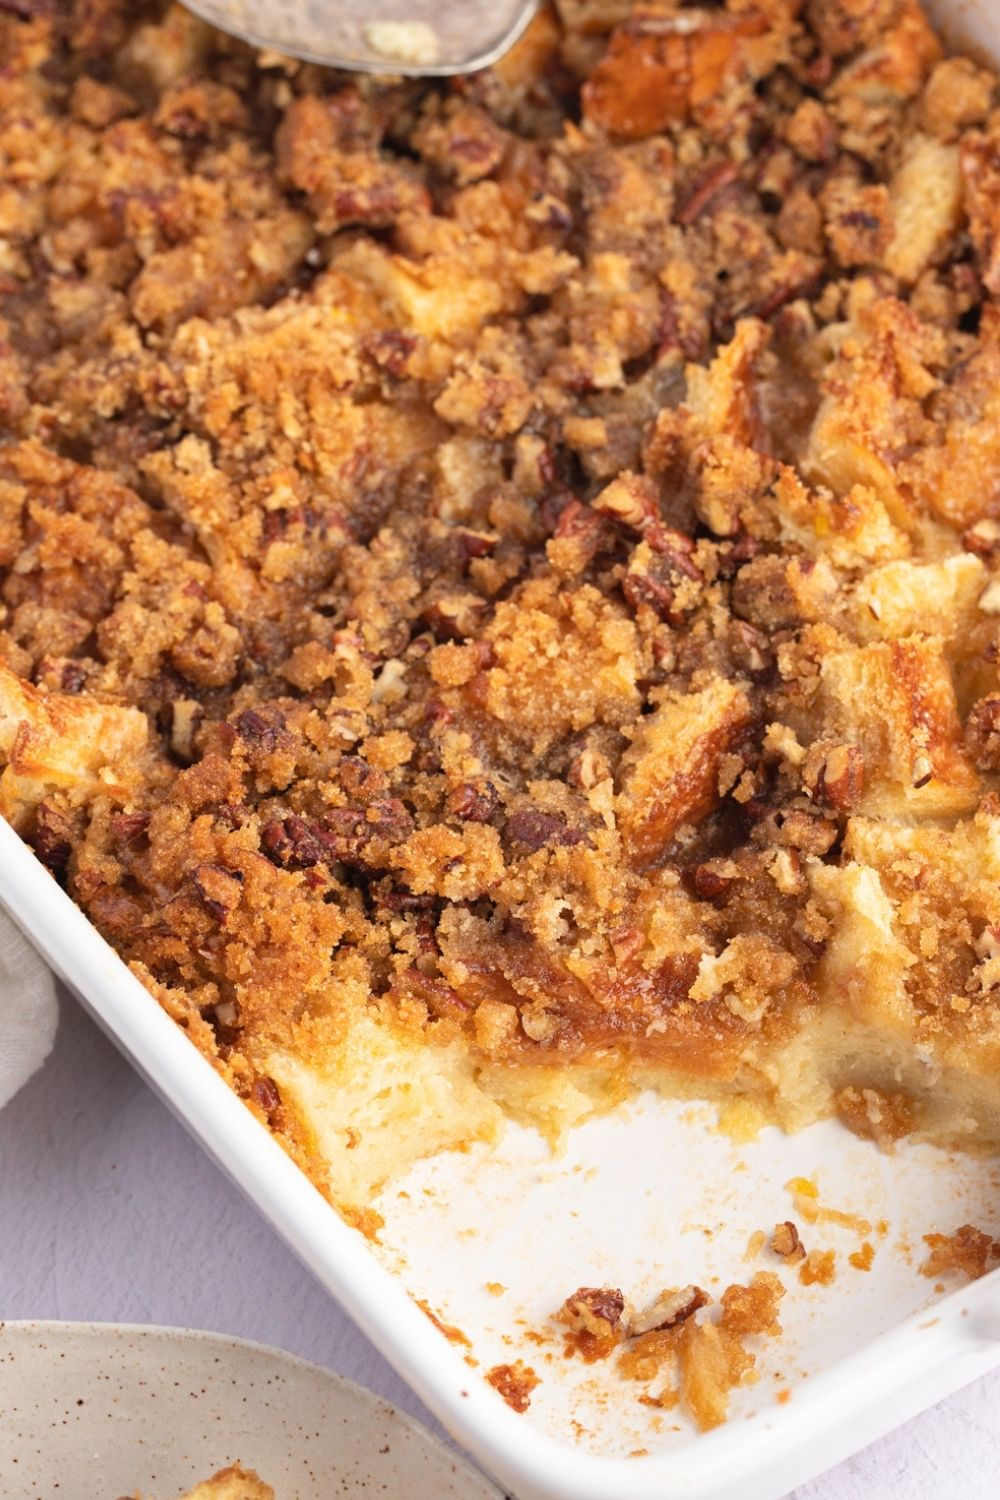 Closeup of Homemade Paula Deen Bread Pudding in a Casserole Dish with Some Bread Pudding Missing